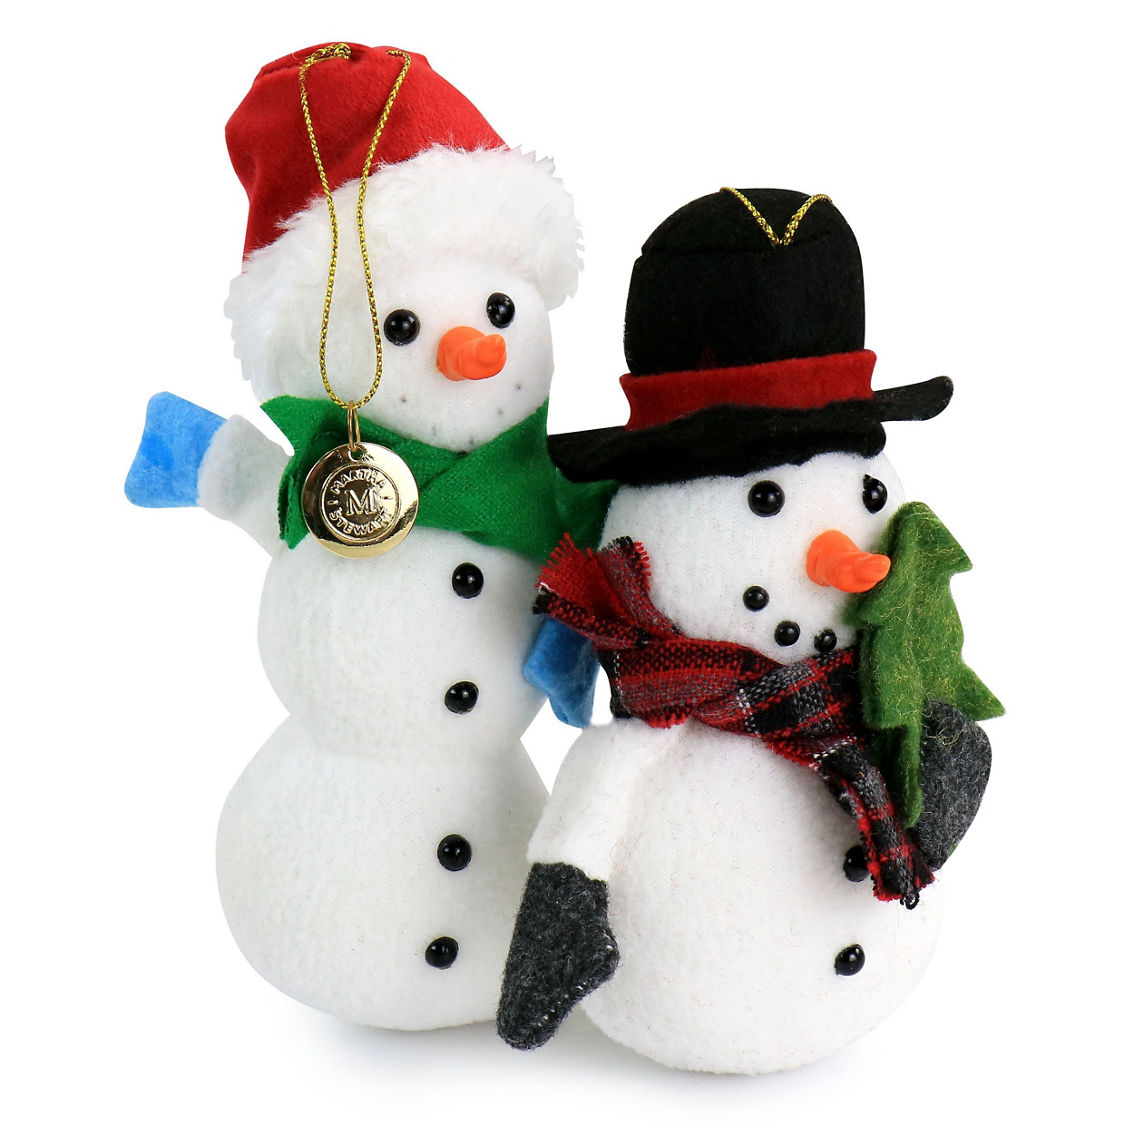 Martha Stewart Holiday Plush Polar Bear and Snowman 4 Piece Ornament Set in Whit - Image 2 of 5